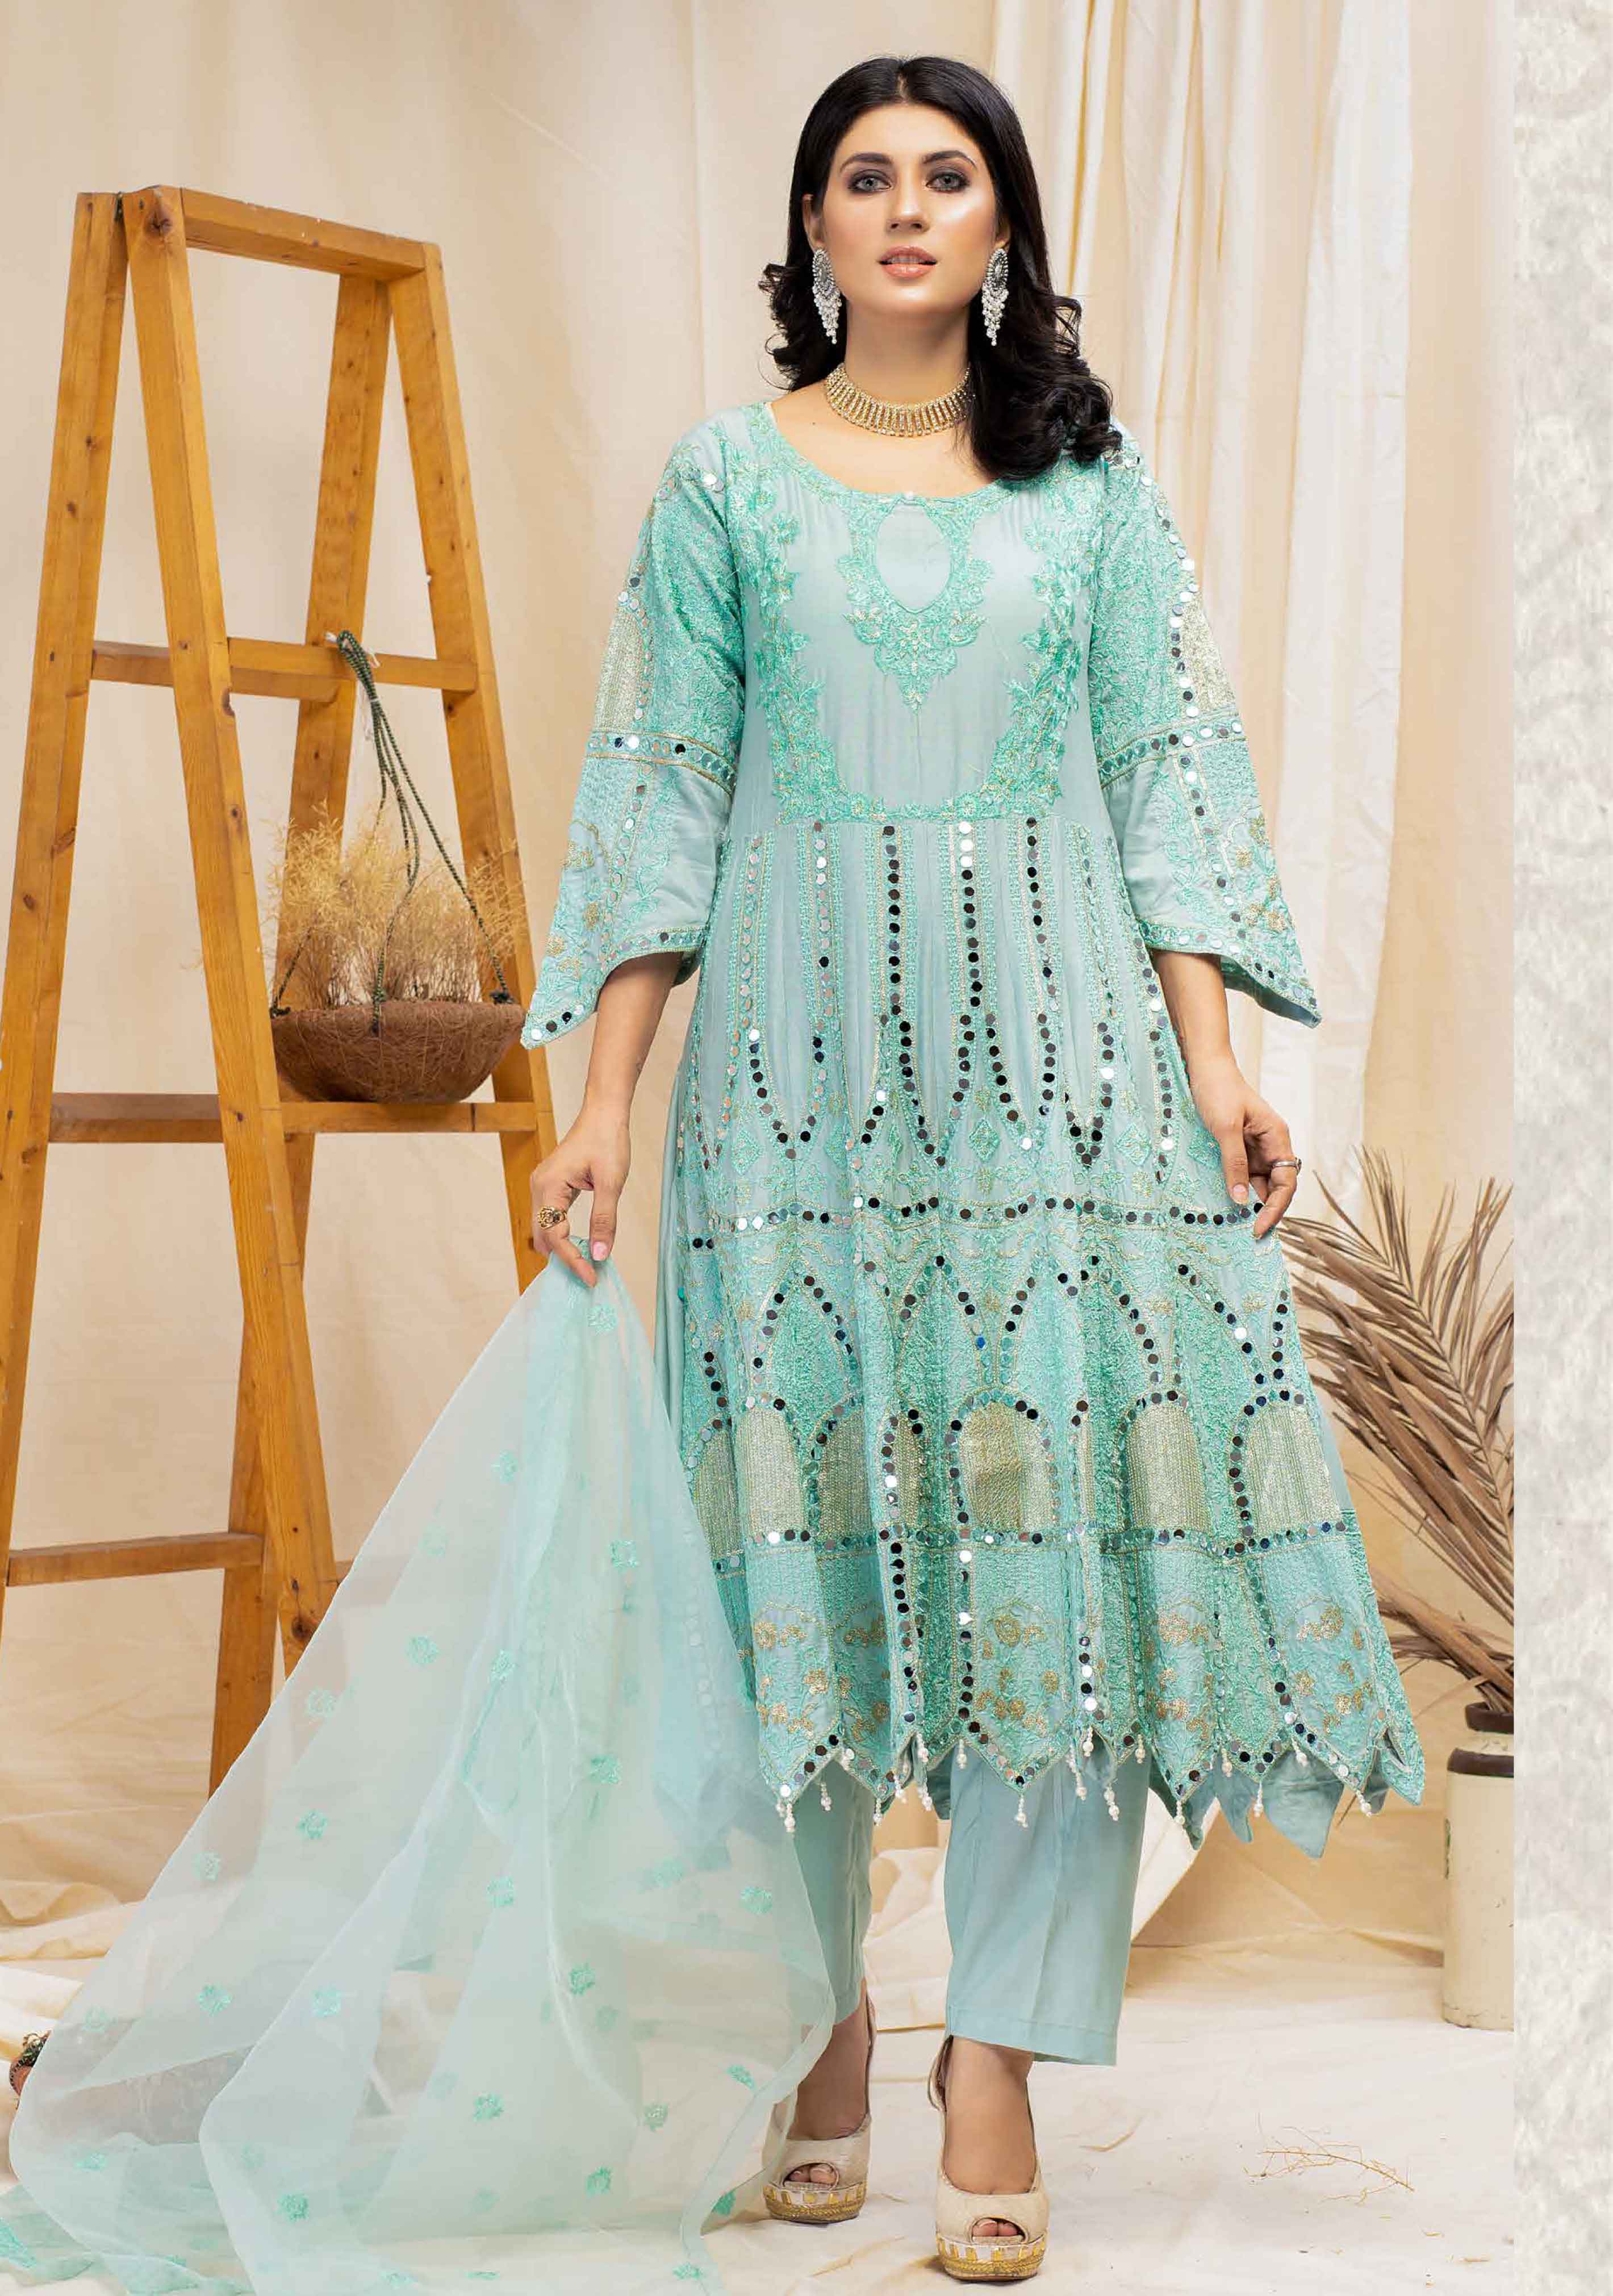 Simrans Mirror Long Frock Outfit with Embroidered Net Dupatta